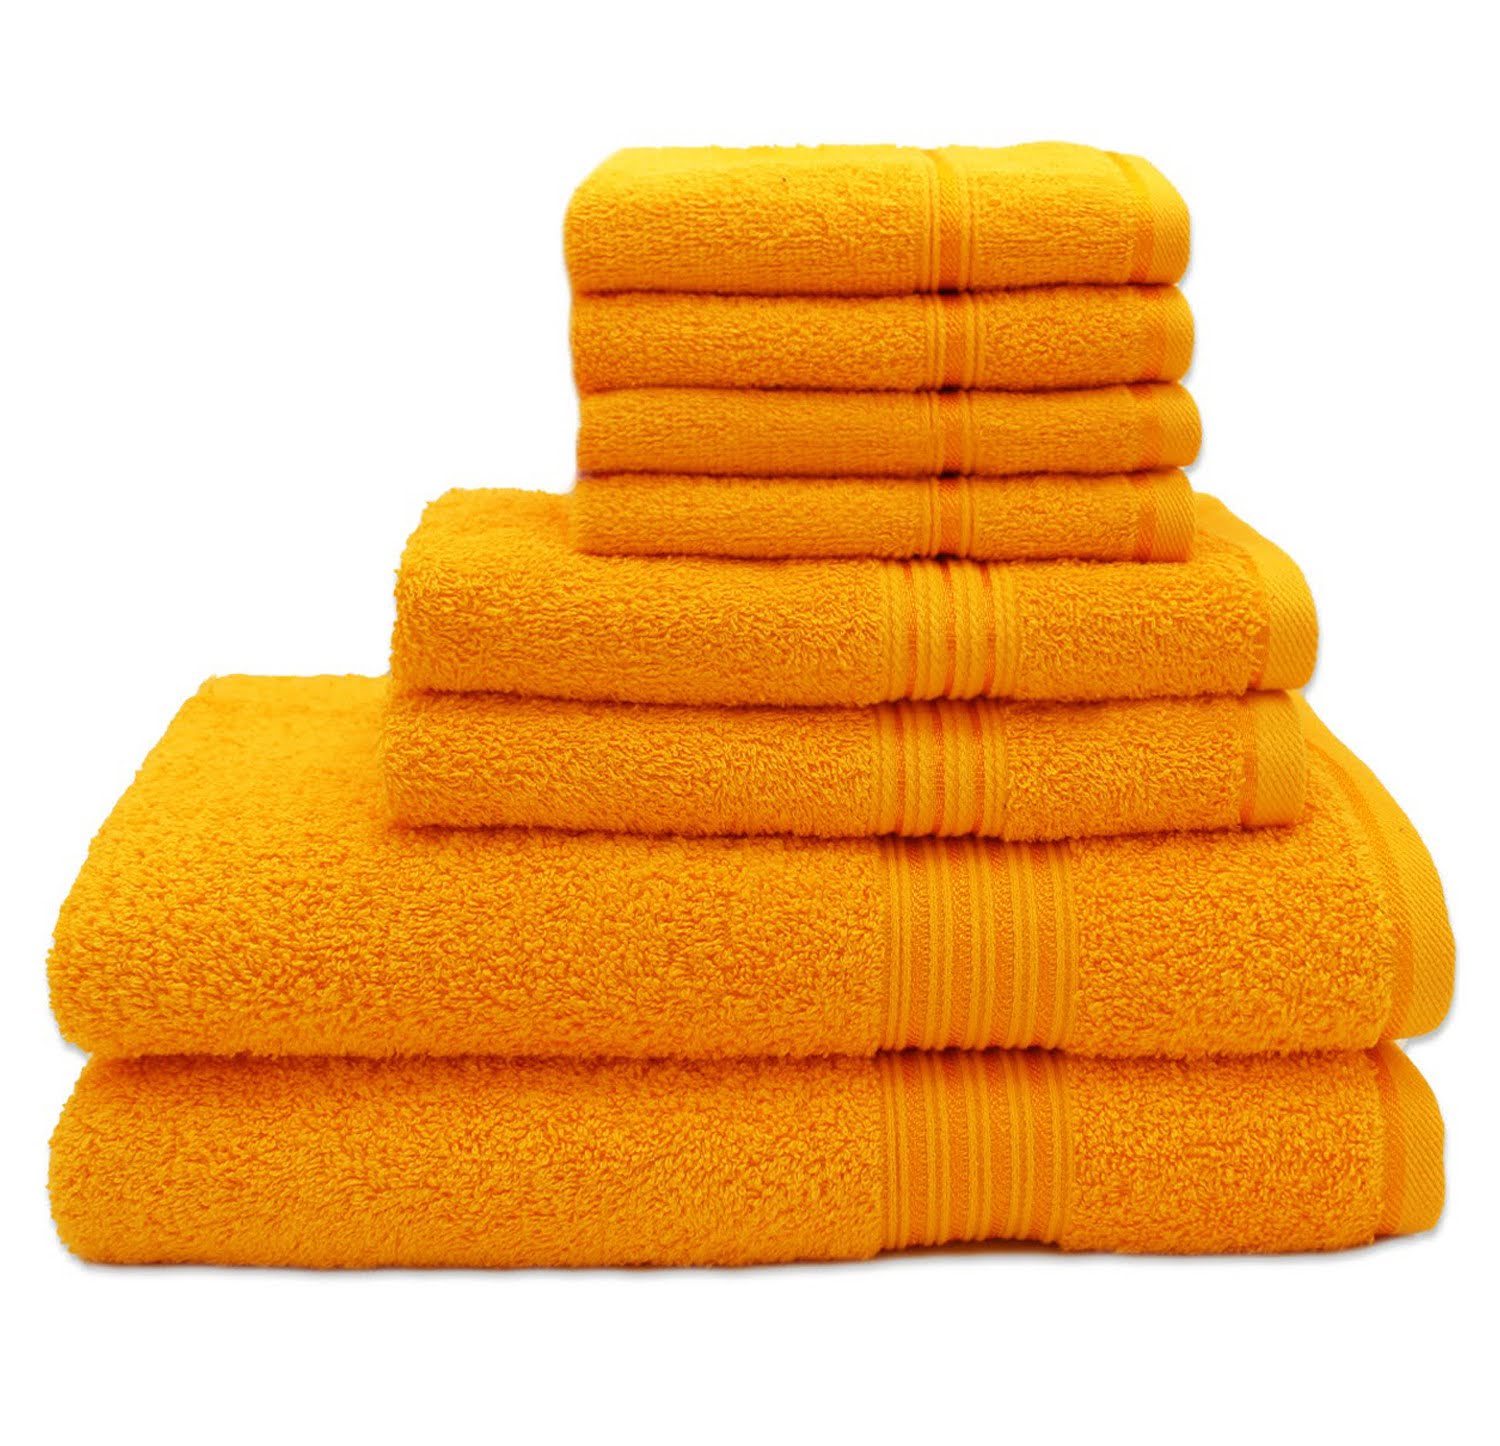 GEORGE & JIMMY Blancho Bedding 8 Piece 550 GSM 2 ply Quality Luxury Towel Set with 2 Bath Towels 2 Hand Towels 4 Wash Cloth Yellow Color